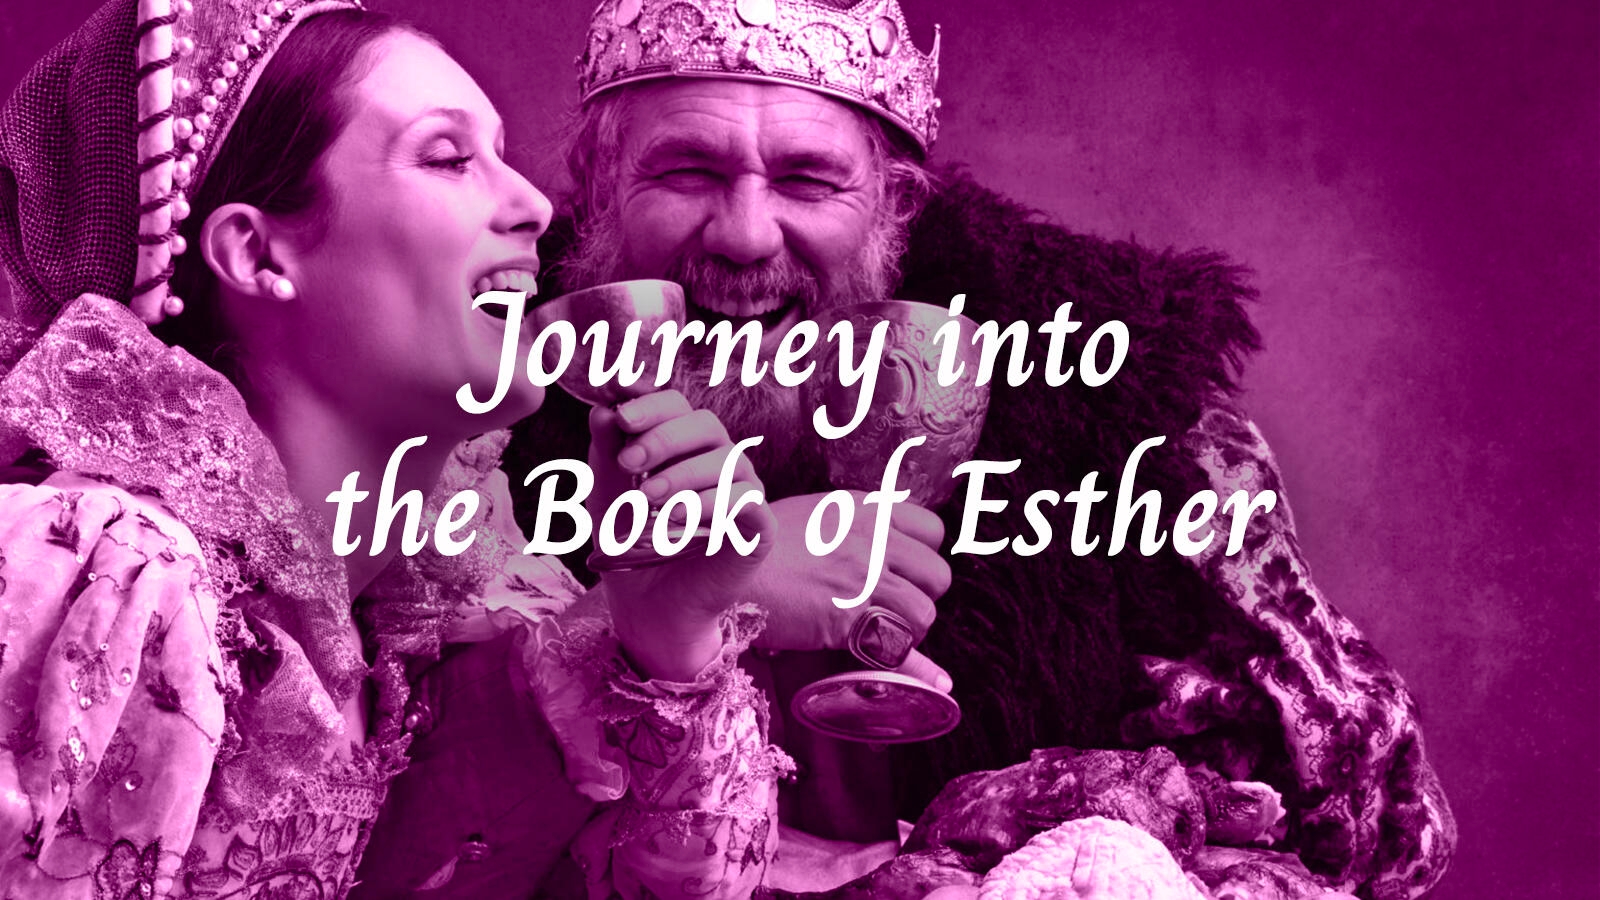 Journey into the Book of Esther